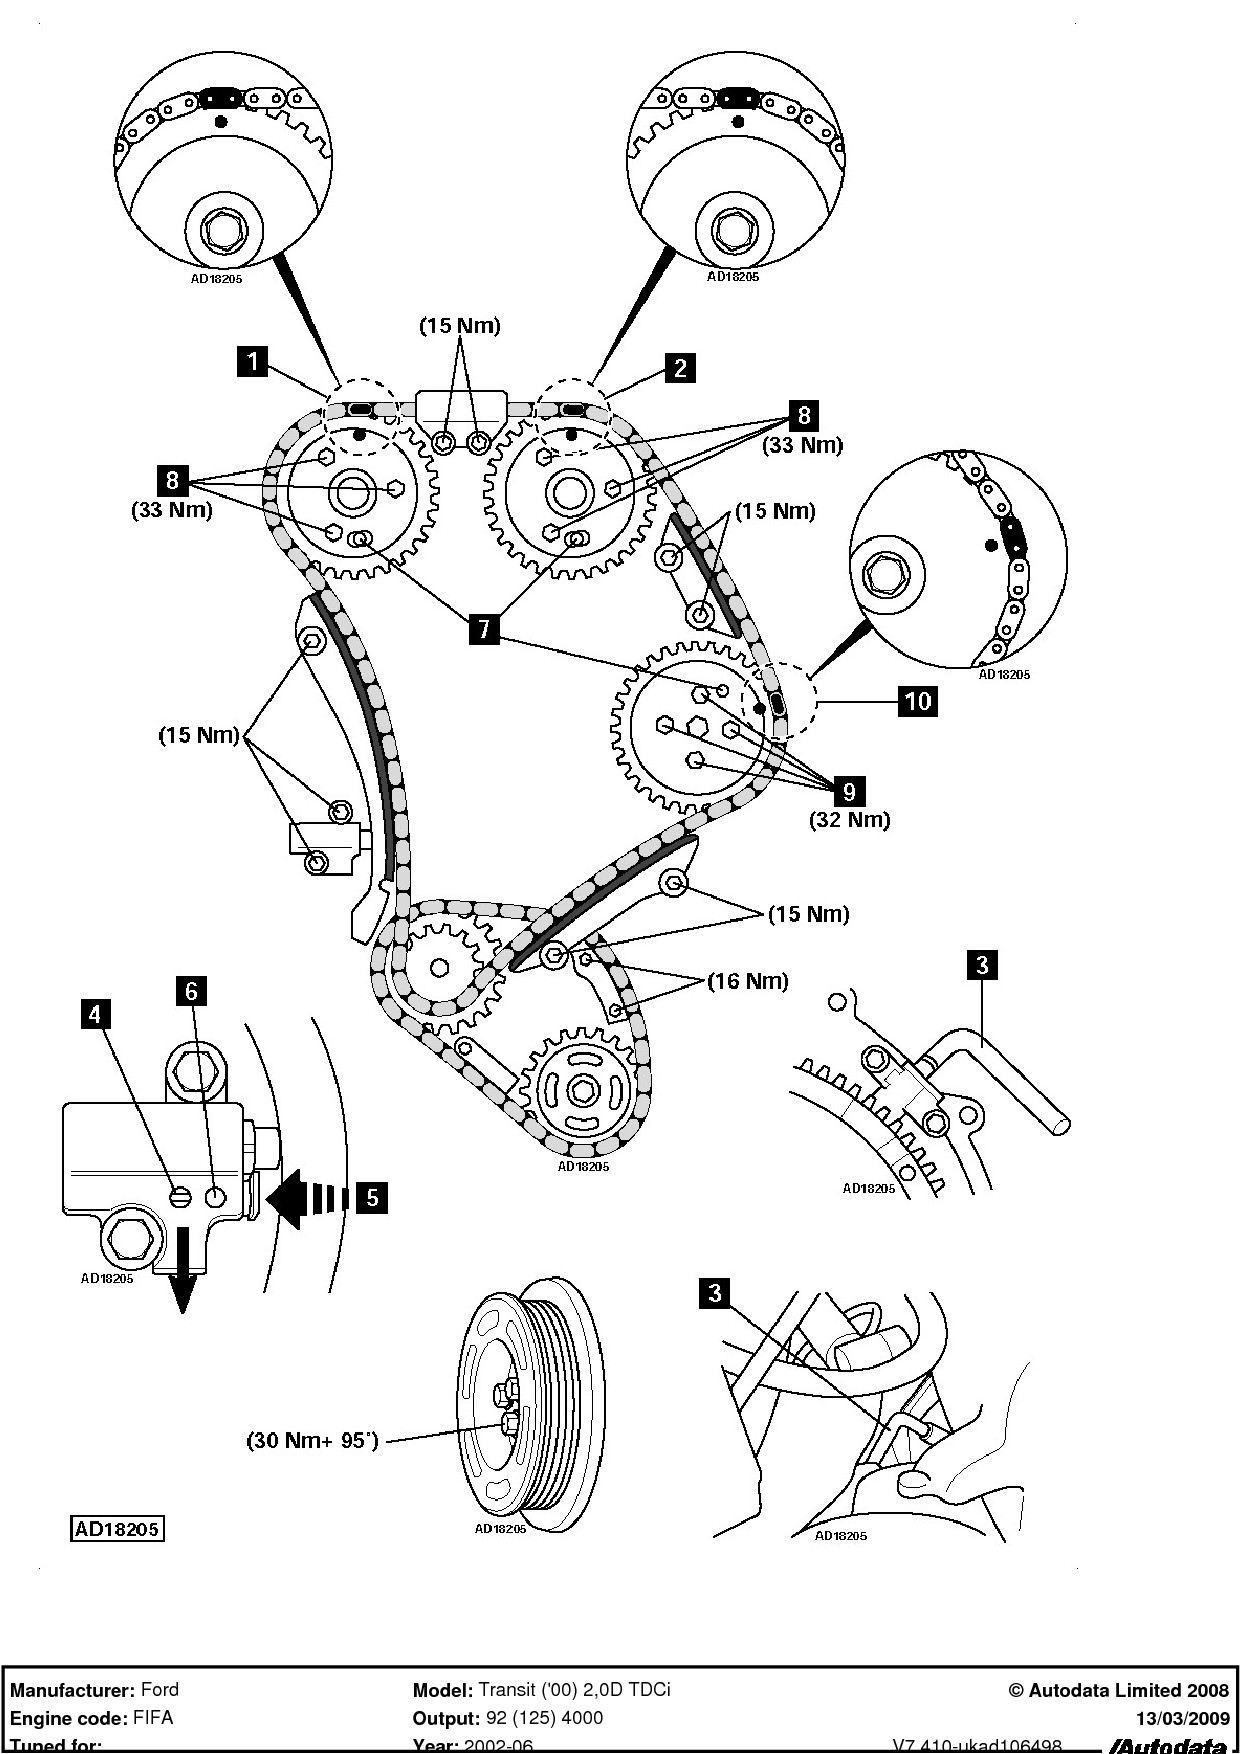 Engine Timing Diagram ford Transit Van 2002 How Do You Set the Timing Marks to Fit New Of Engine Timing Diagram